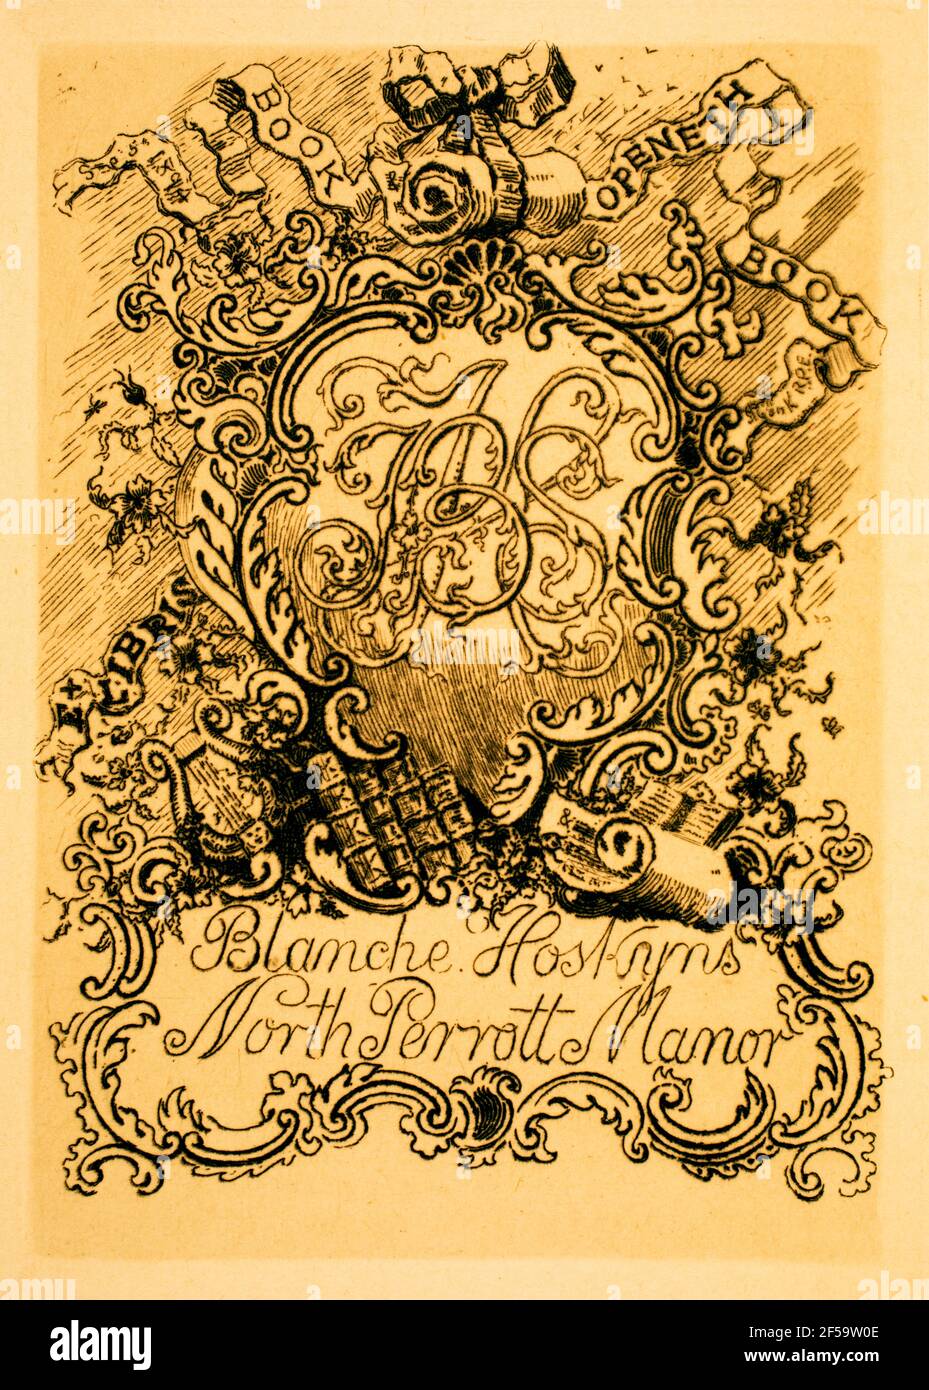 1894 Book Openeth Book engraved heraldic monogram bookplate for Blanche Hoskyns of North Perrott Manor, by British etcher, wood-engraver and painter W Stock Photo